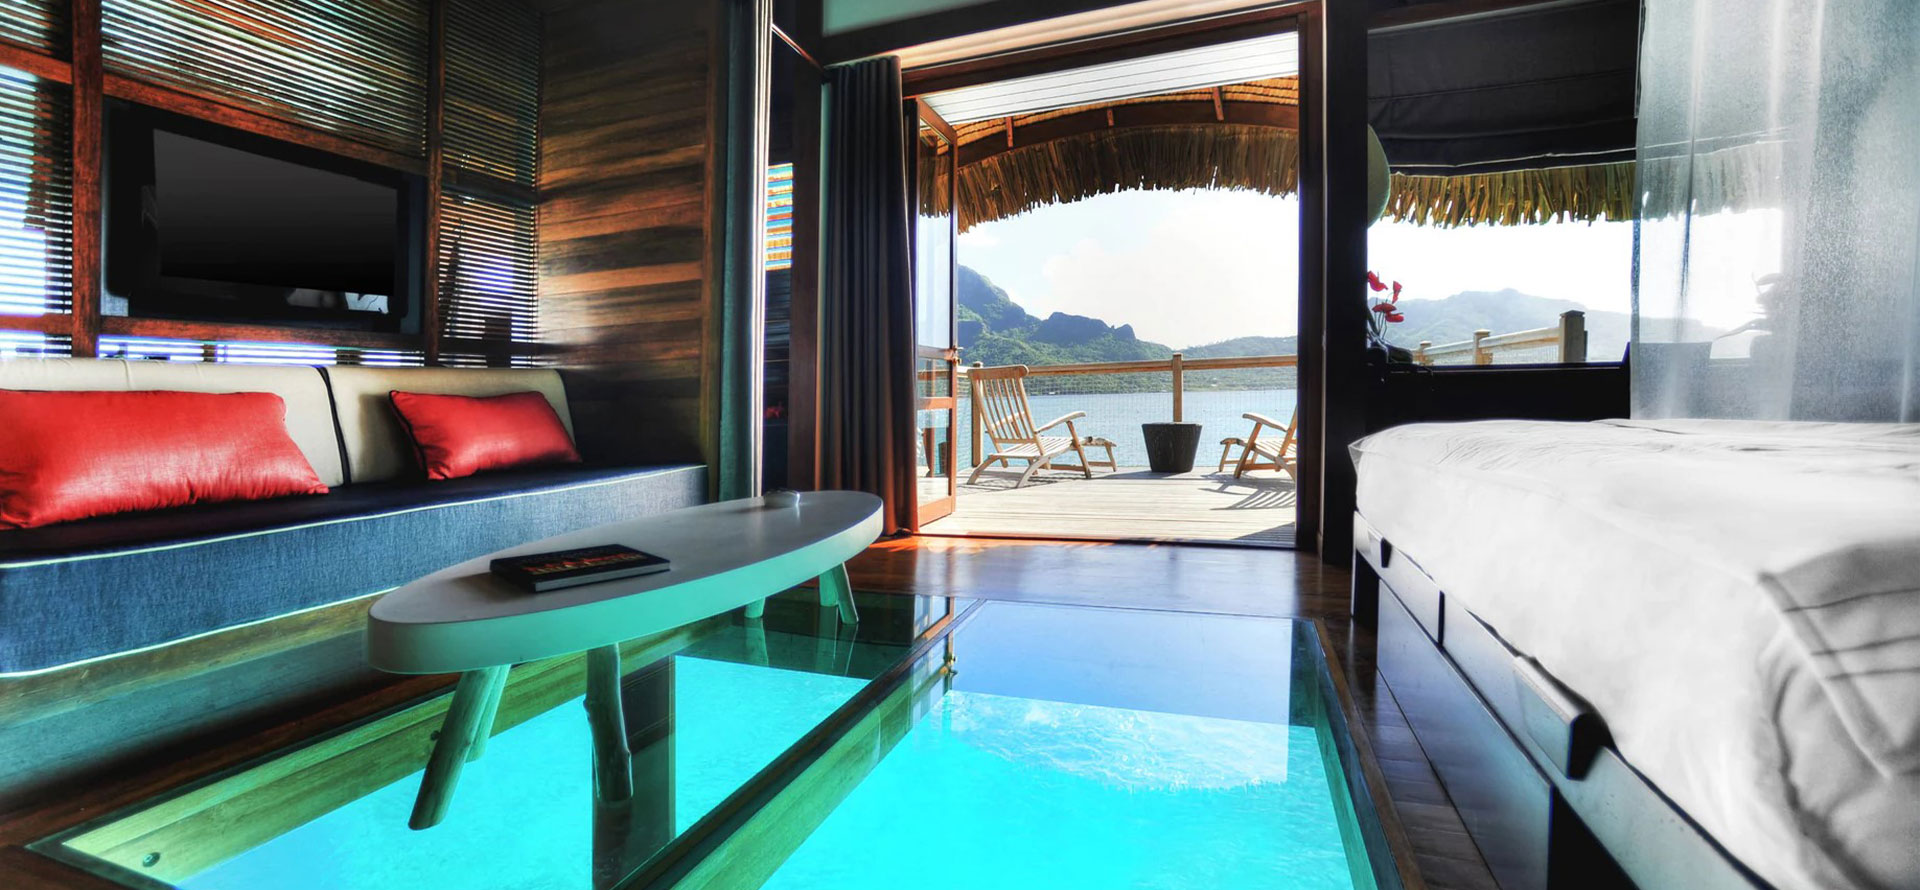 Overwater bungalow view inside.